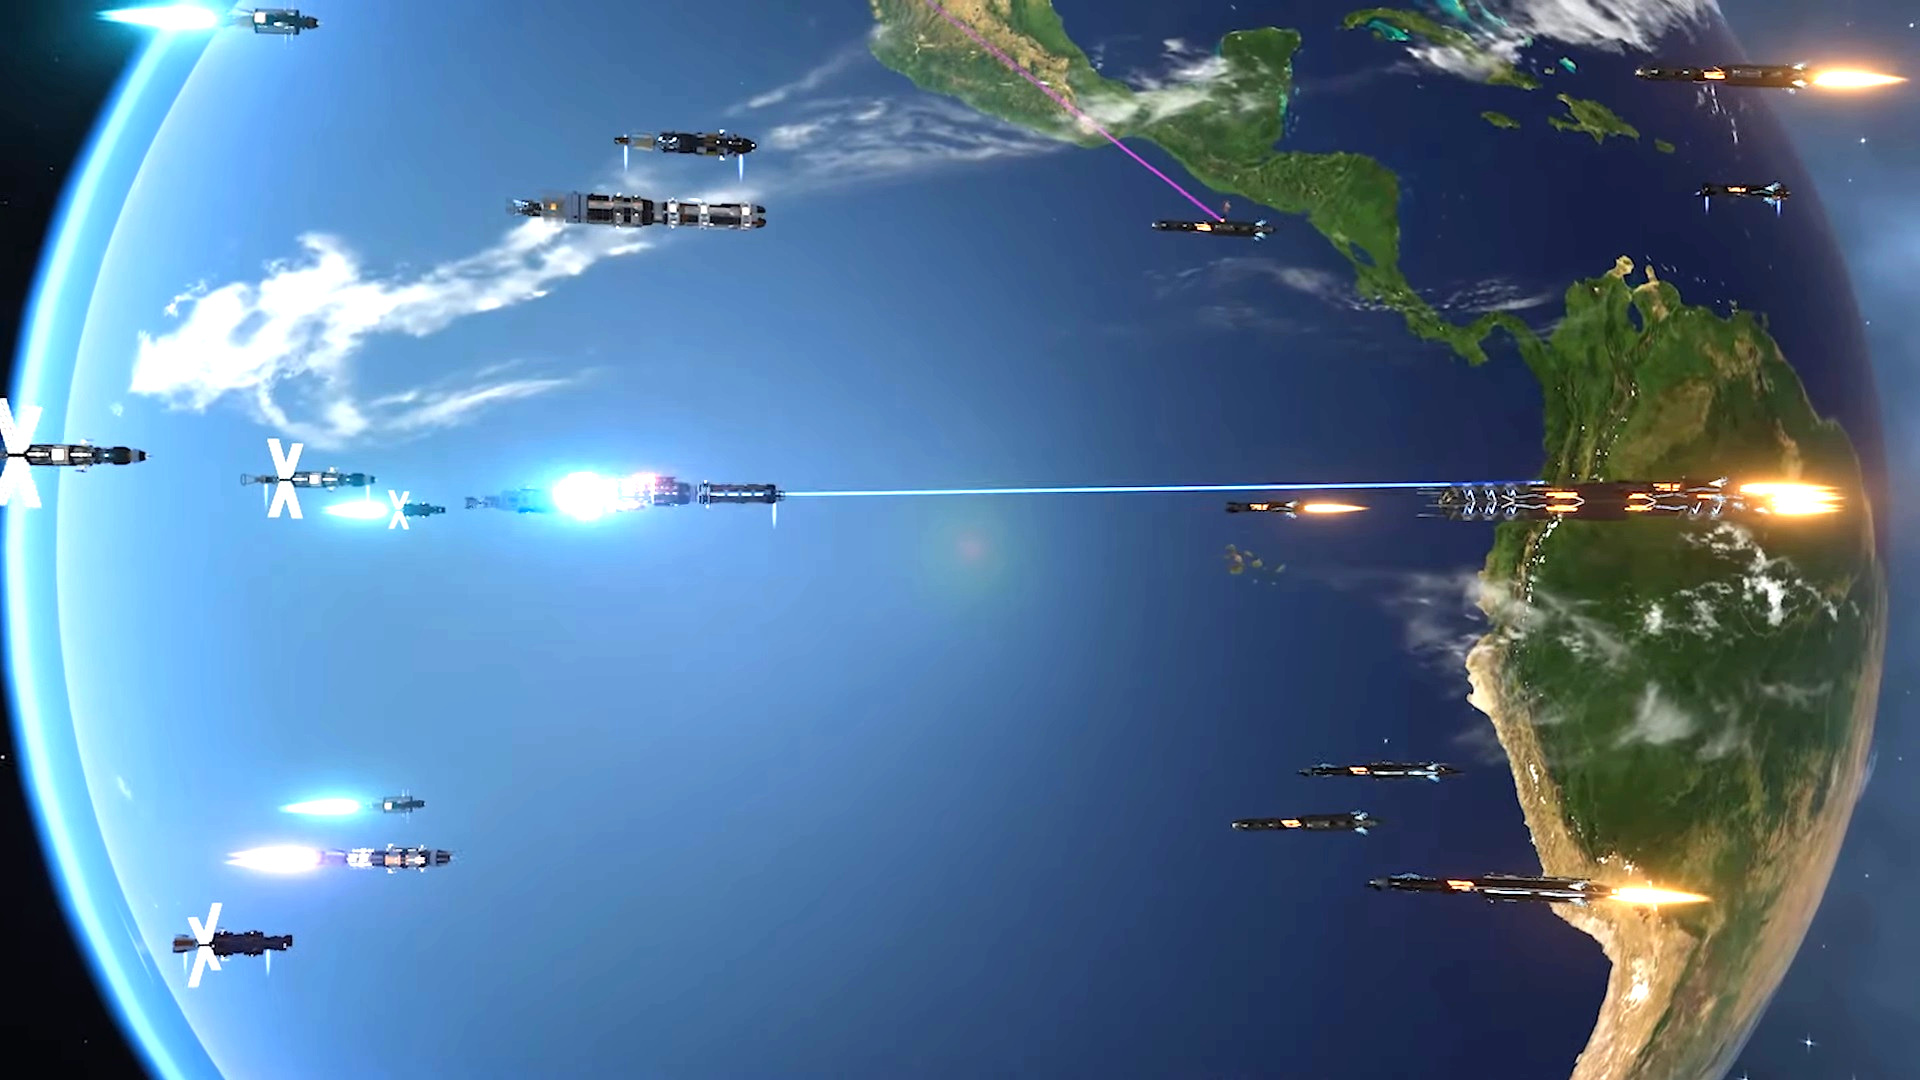 Terra Invicta takes XCOM and turns it into an Expanse-style grand strategy game